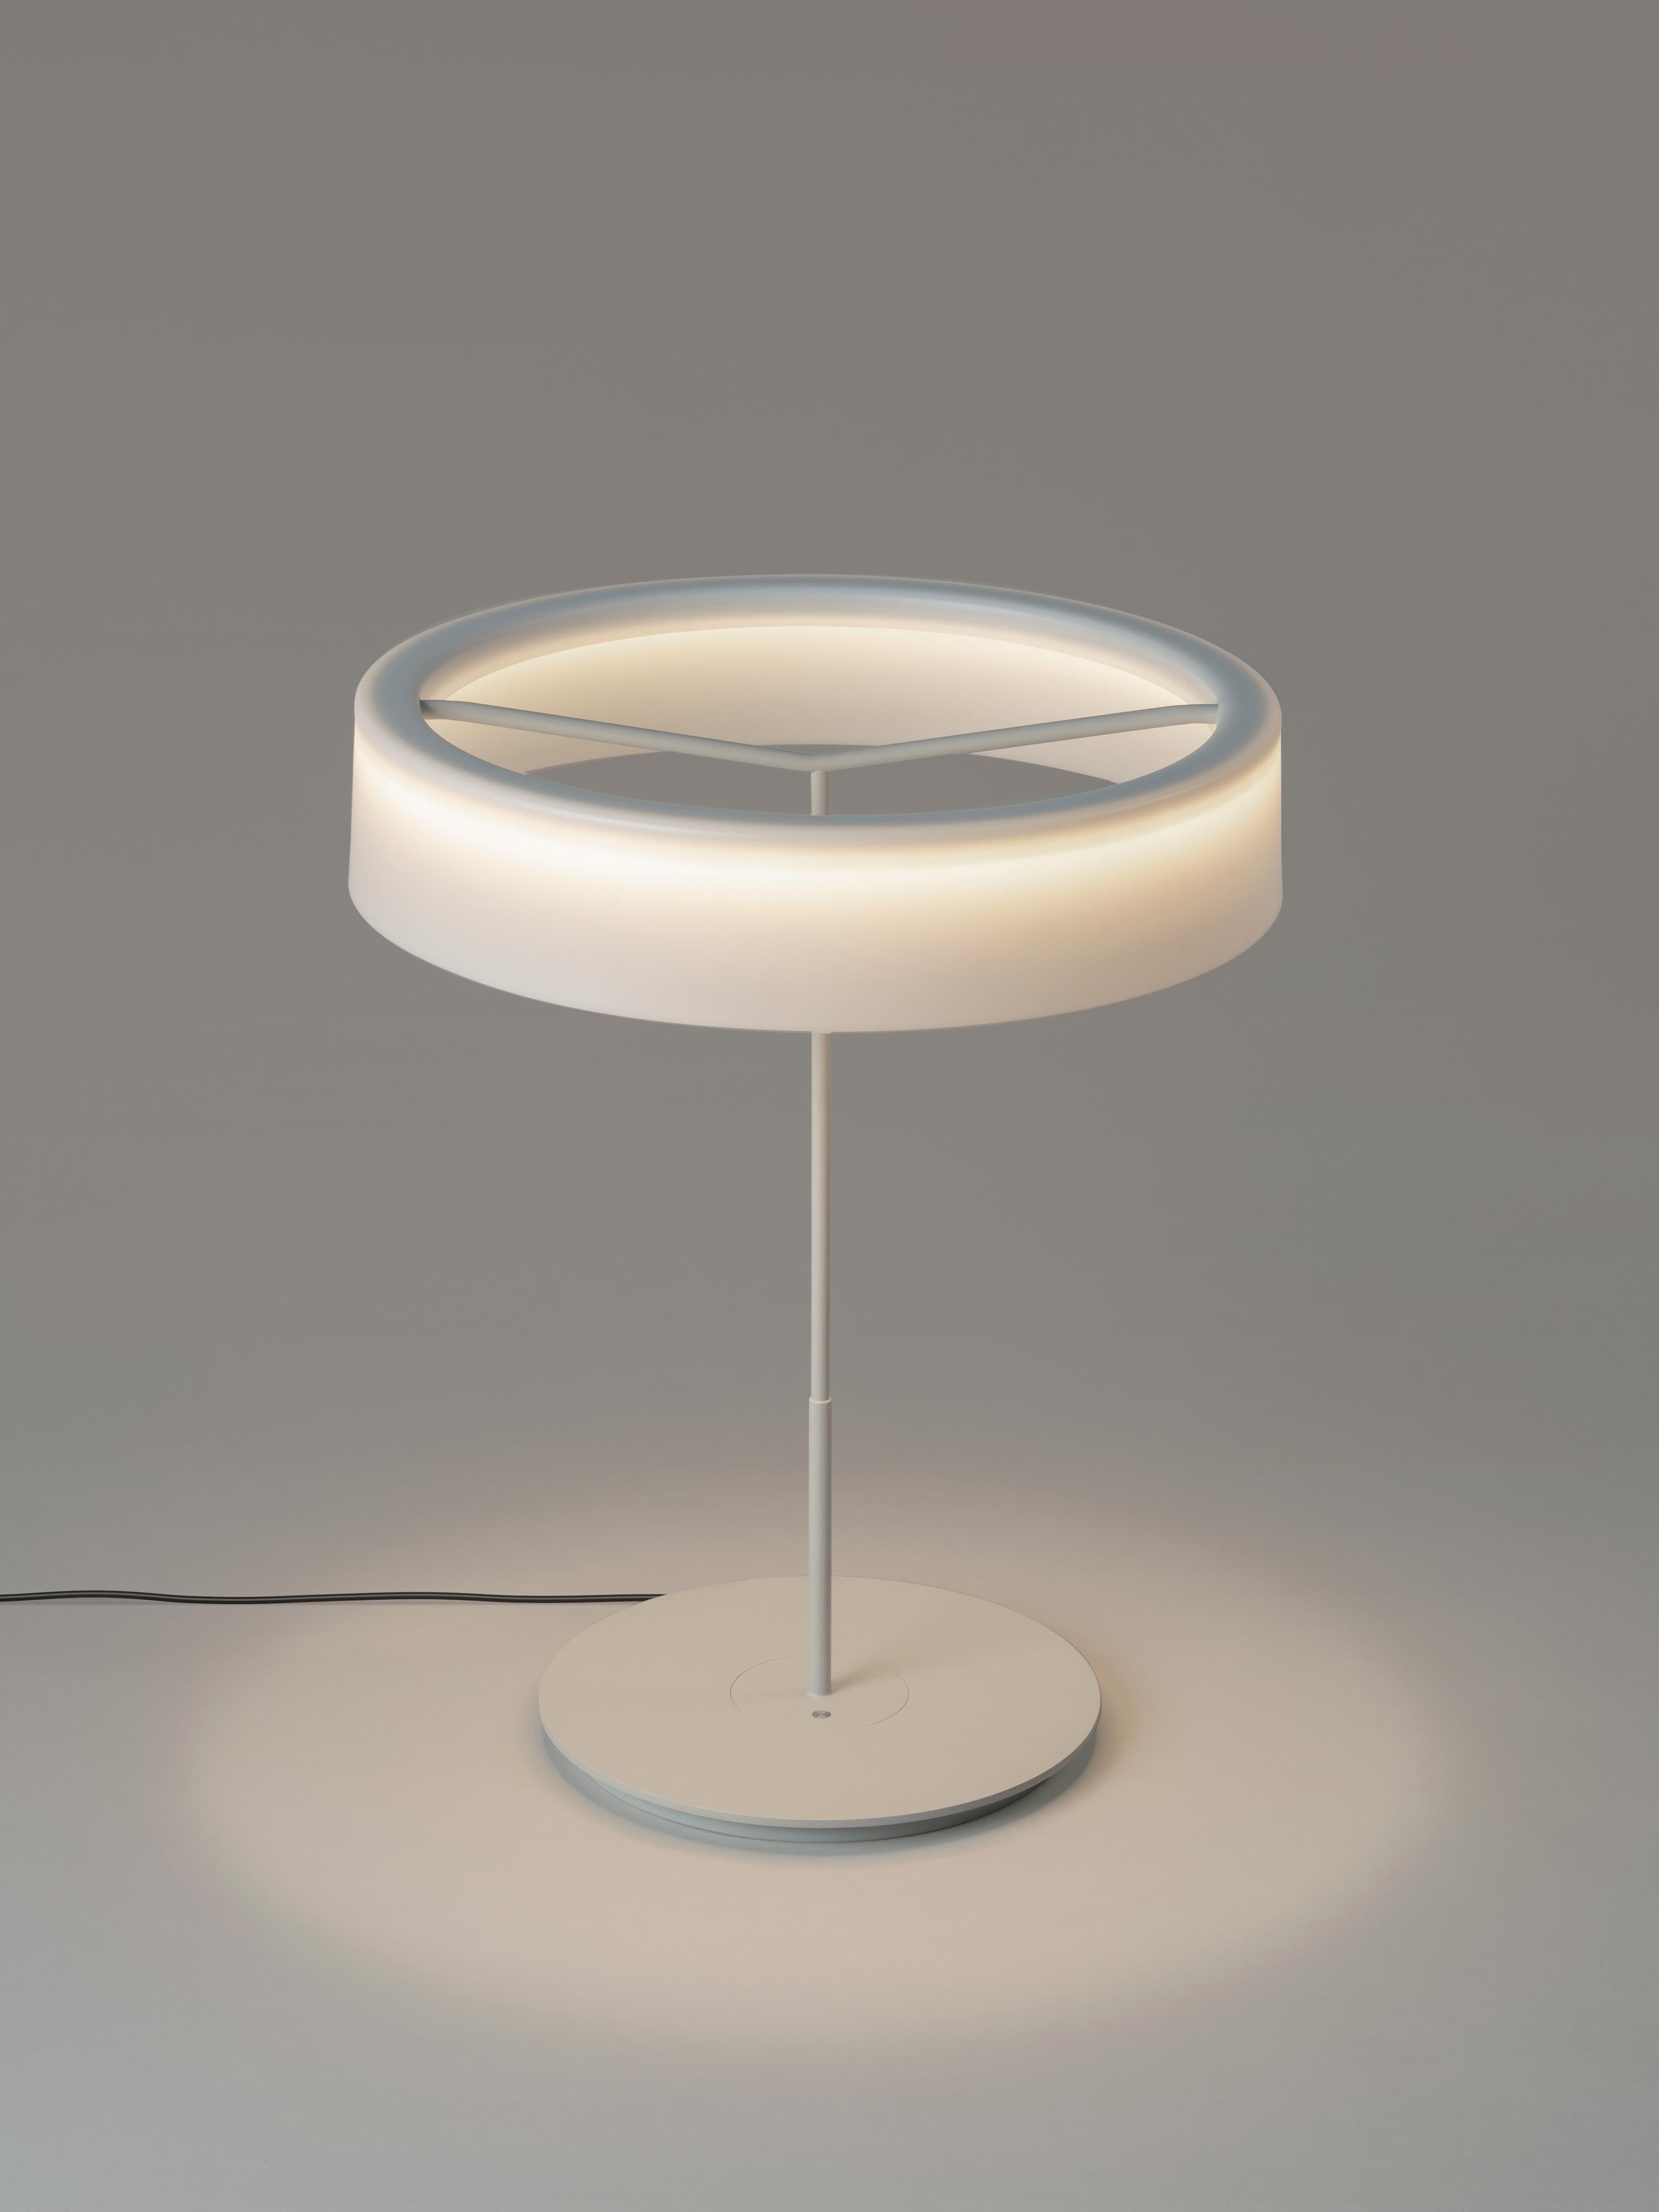 Large White Sin table lamp with shade I by Antoni Arola
Dimensions: D 48 x H 58 cm
Materials: Metal.
Lampshade: White opal methacrylate.
Available in white or graphite, with or without shade.

A lamp that combines simplicity and technology to